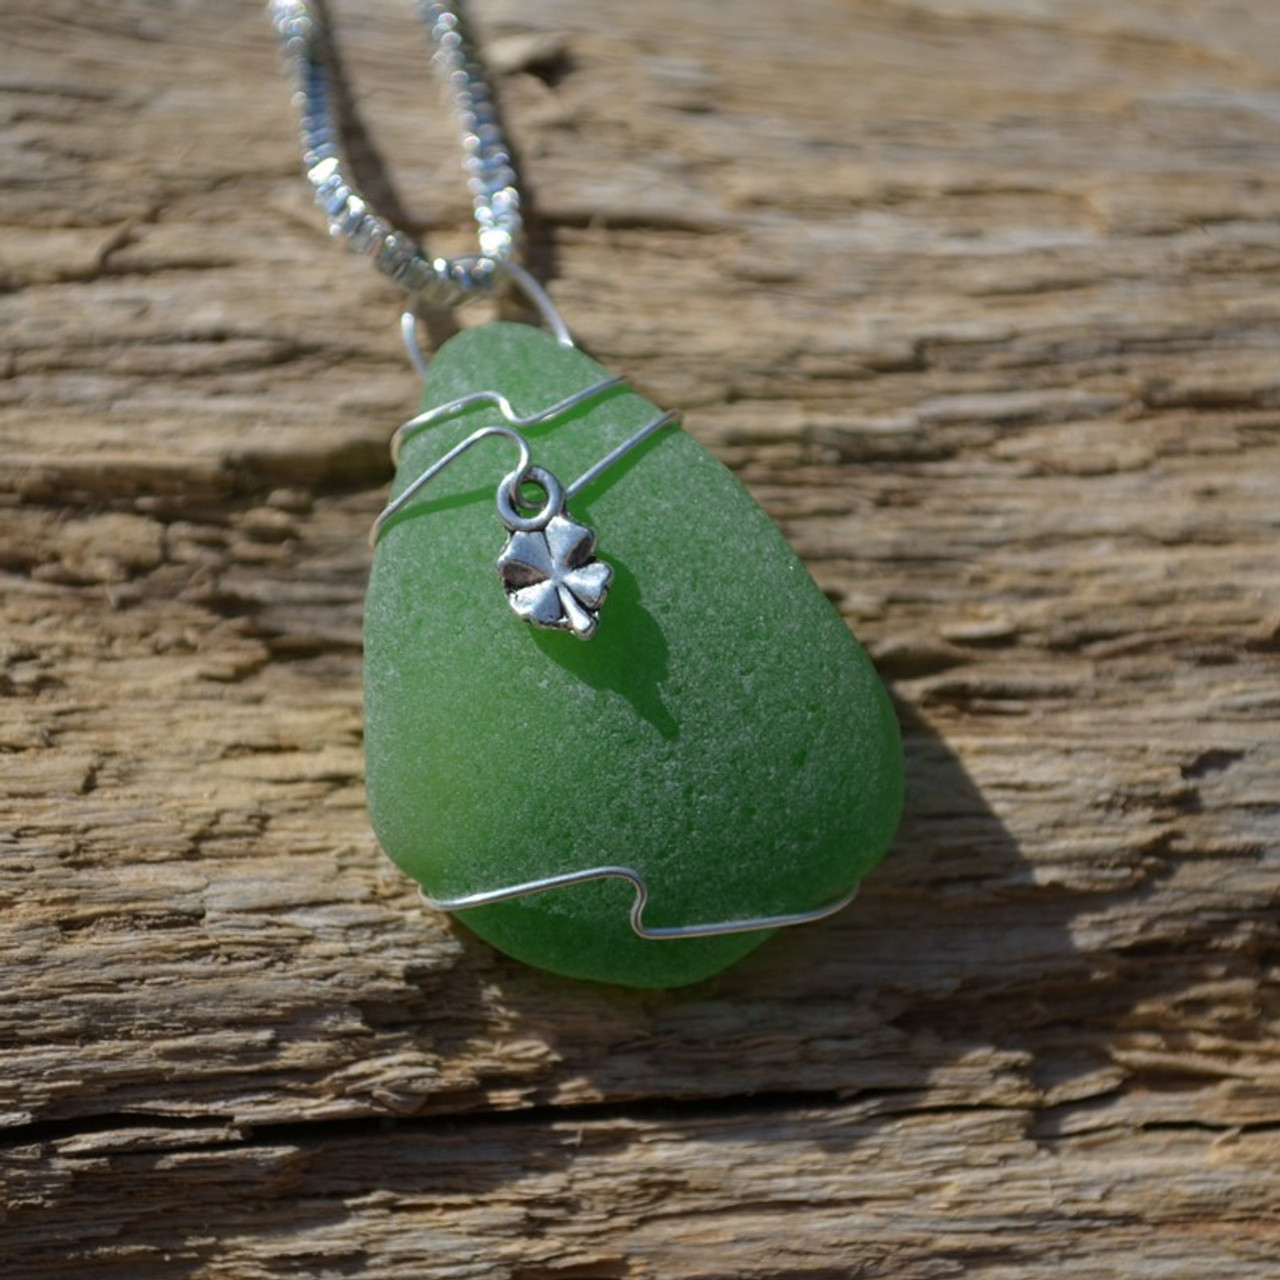 Sea Glass Necklace with a Silver Clover Charm - Made to Order